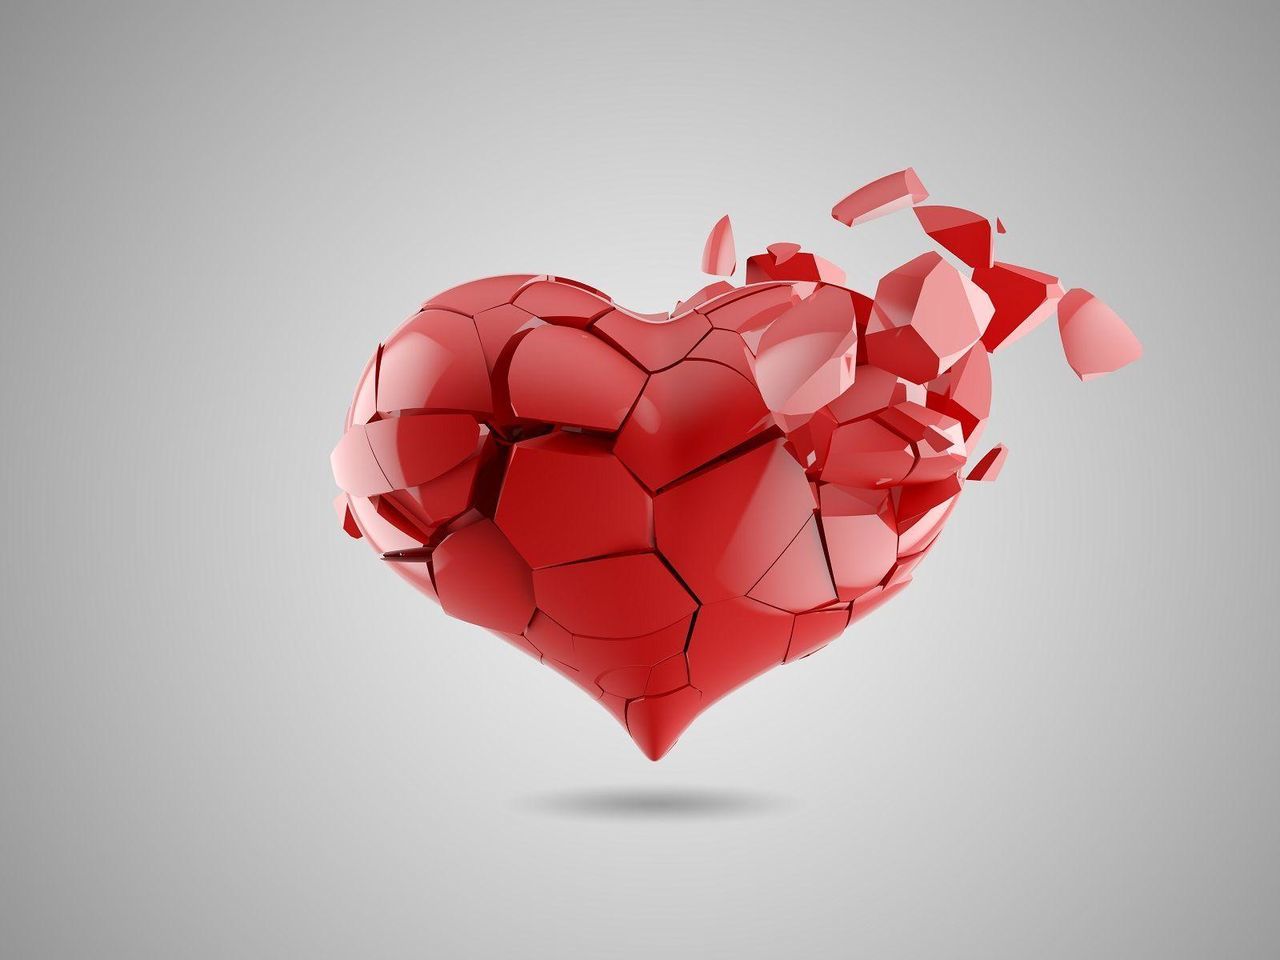 CLOSE-UP OF RED HEART SHAPE AGAINST GRAY BACKGROUND